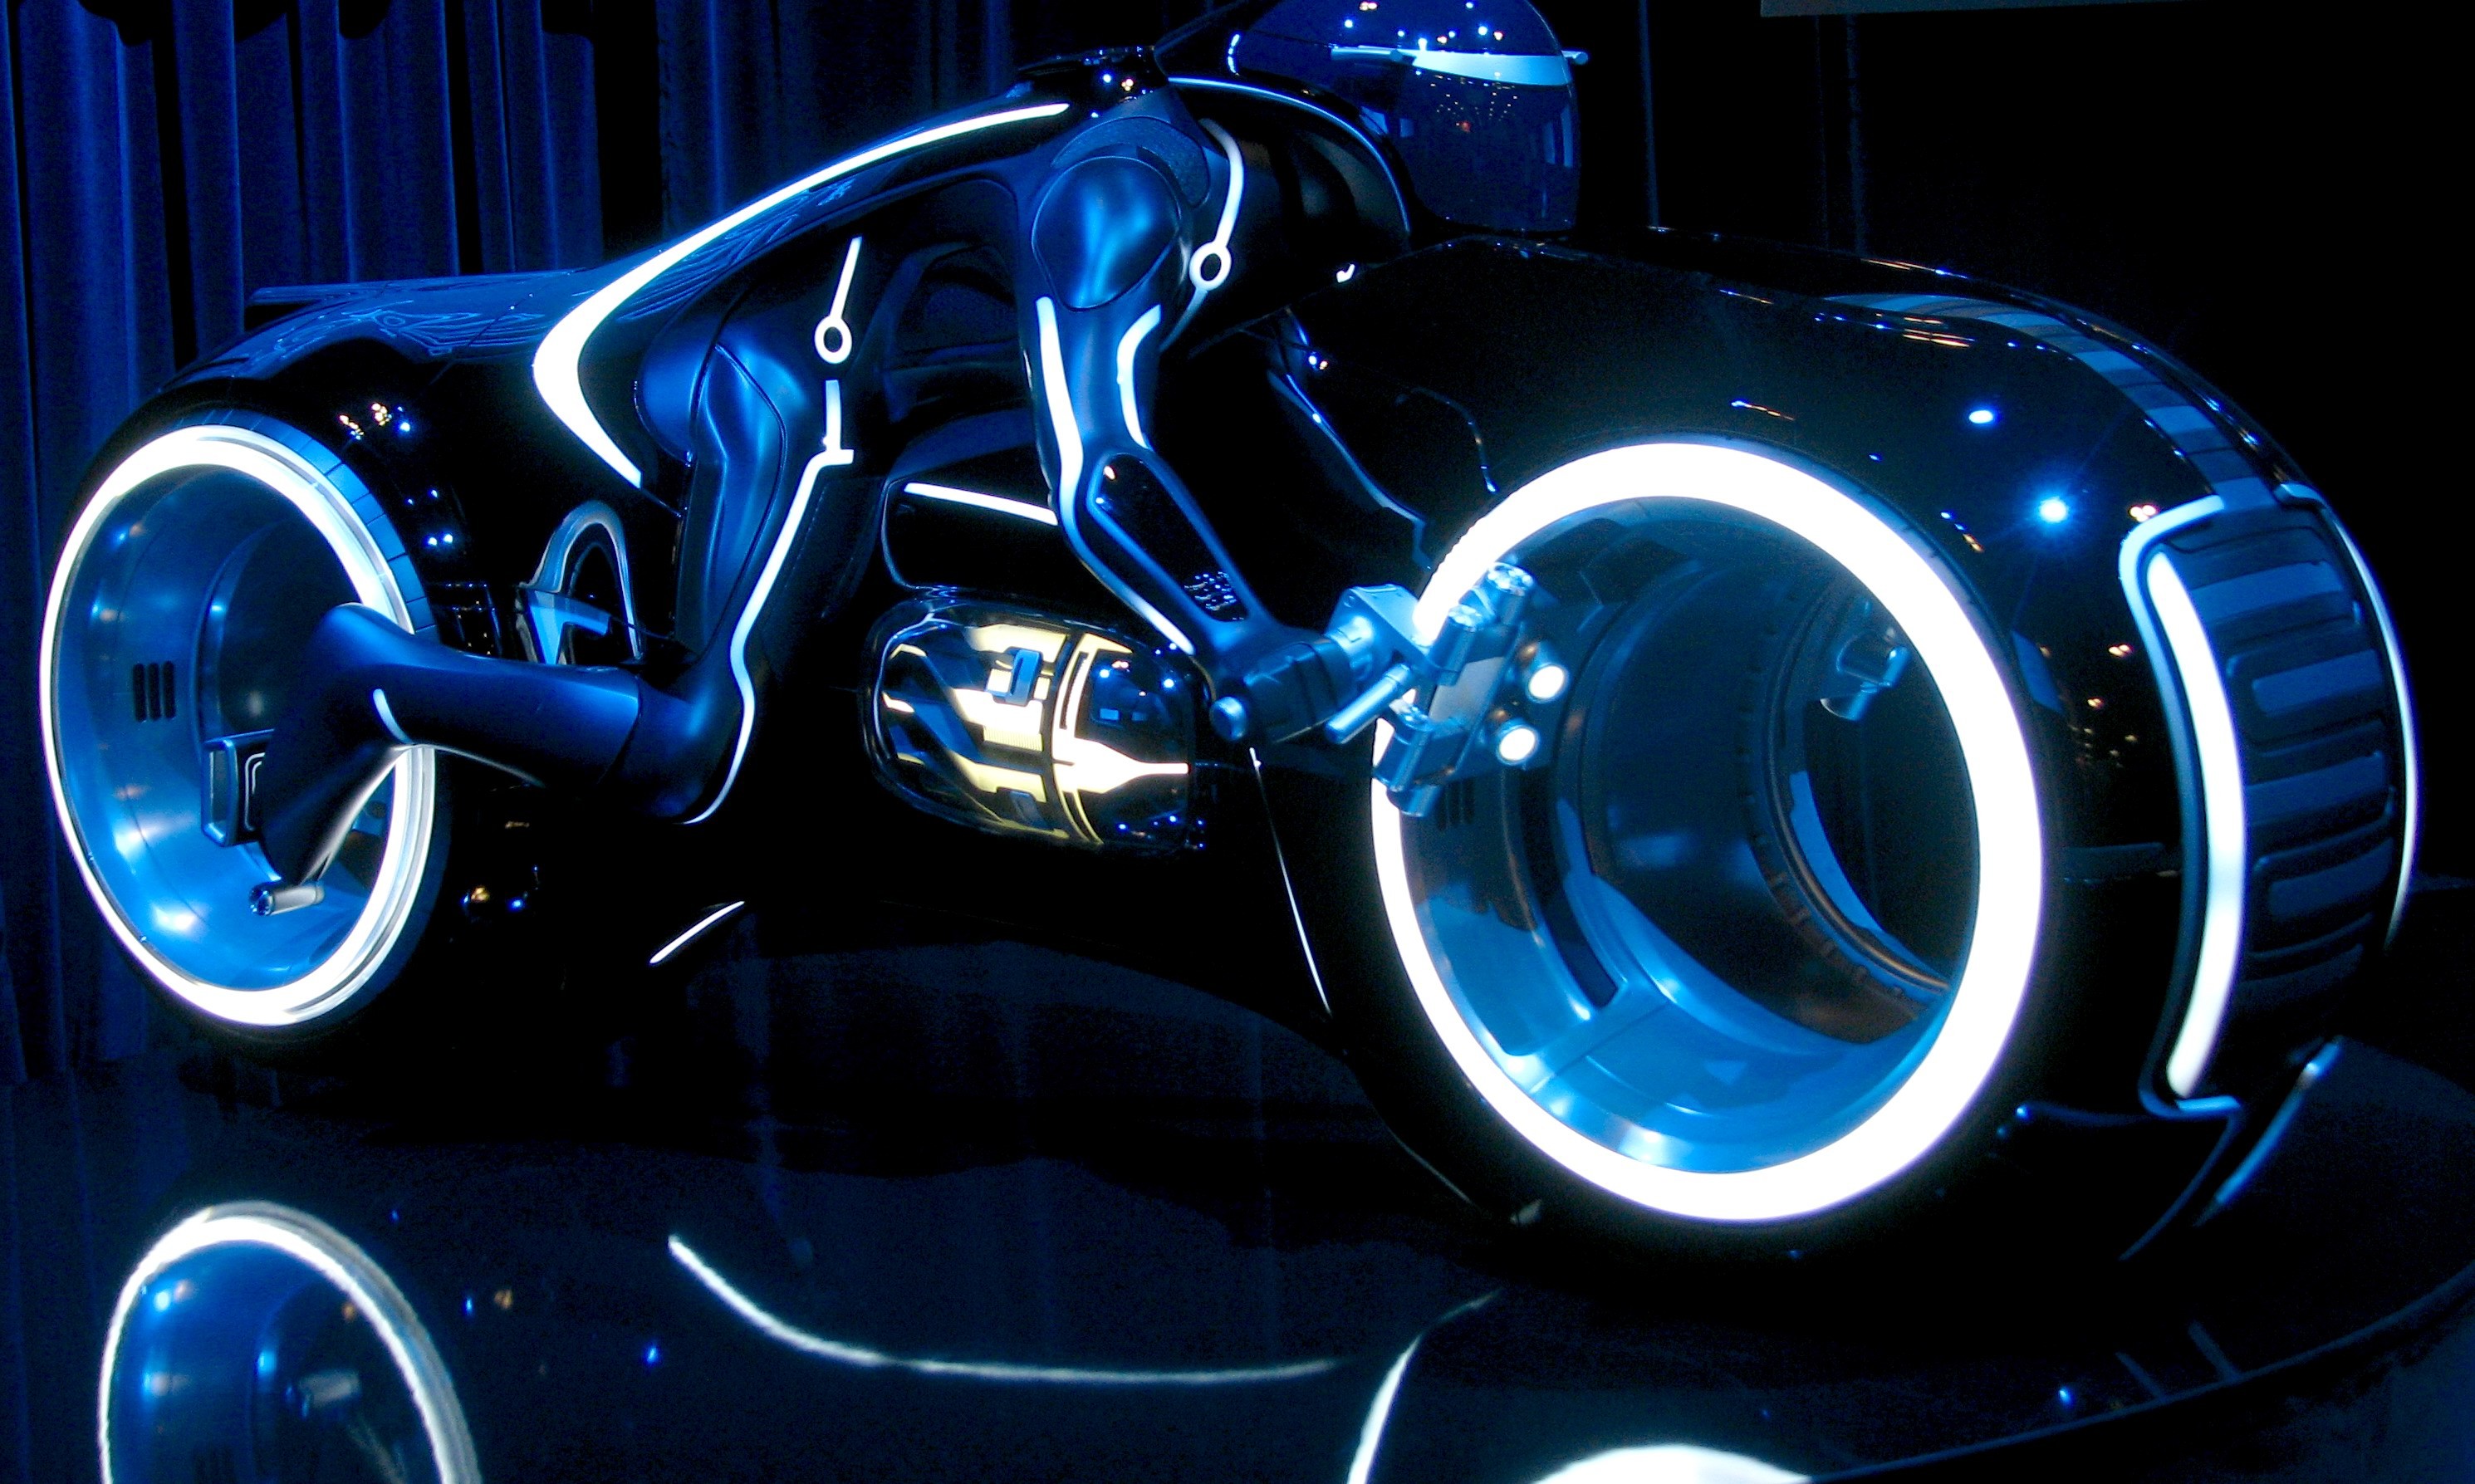 2980x1787 Tron Legacy Technology Amazing Technology for the young and old at heart